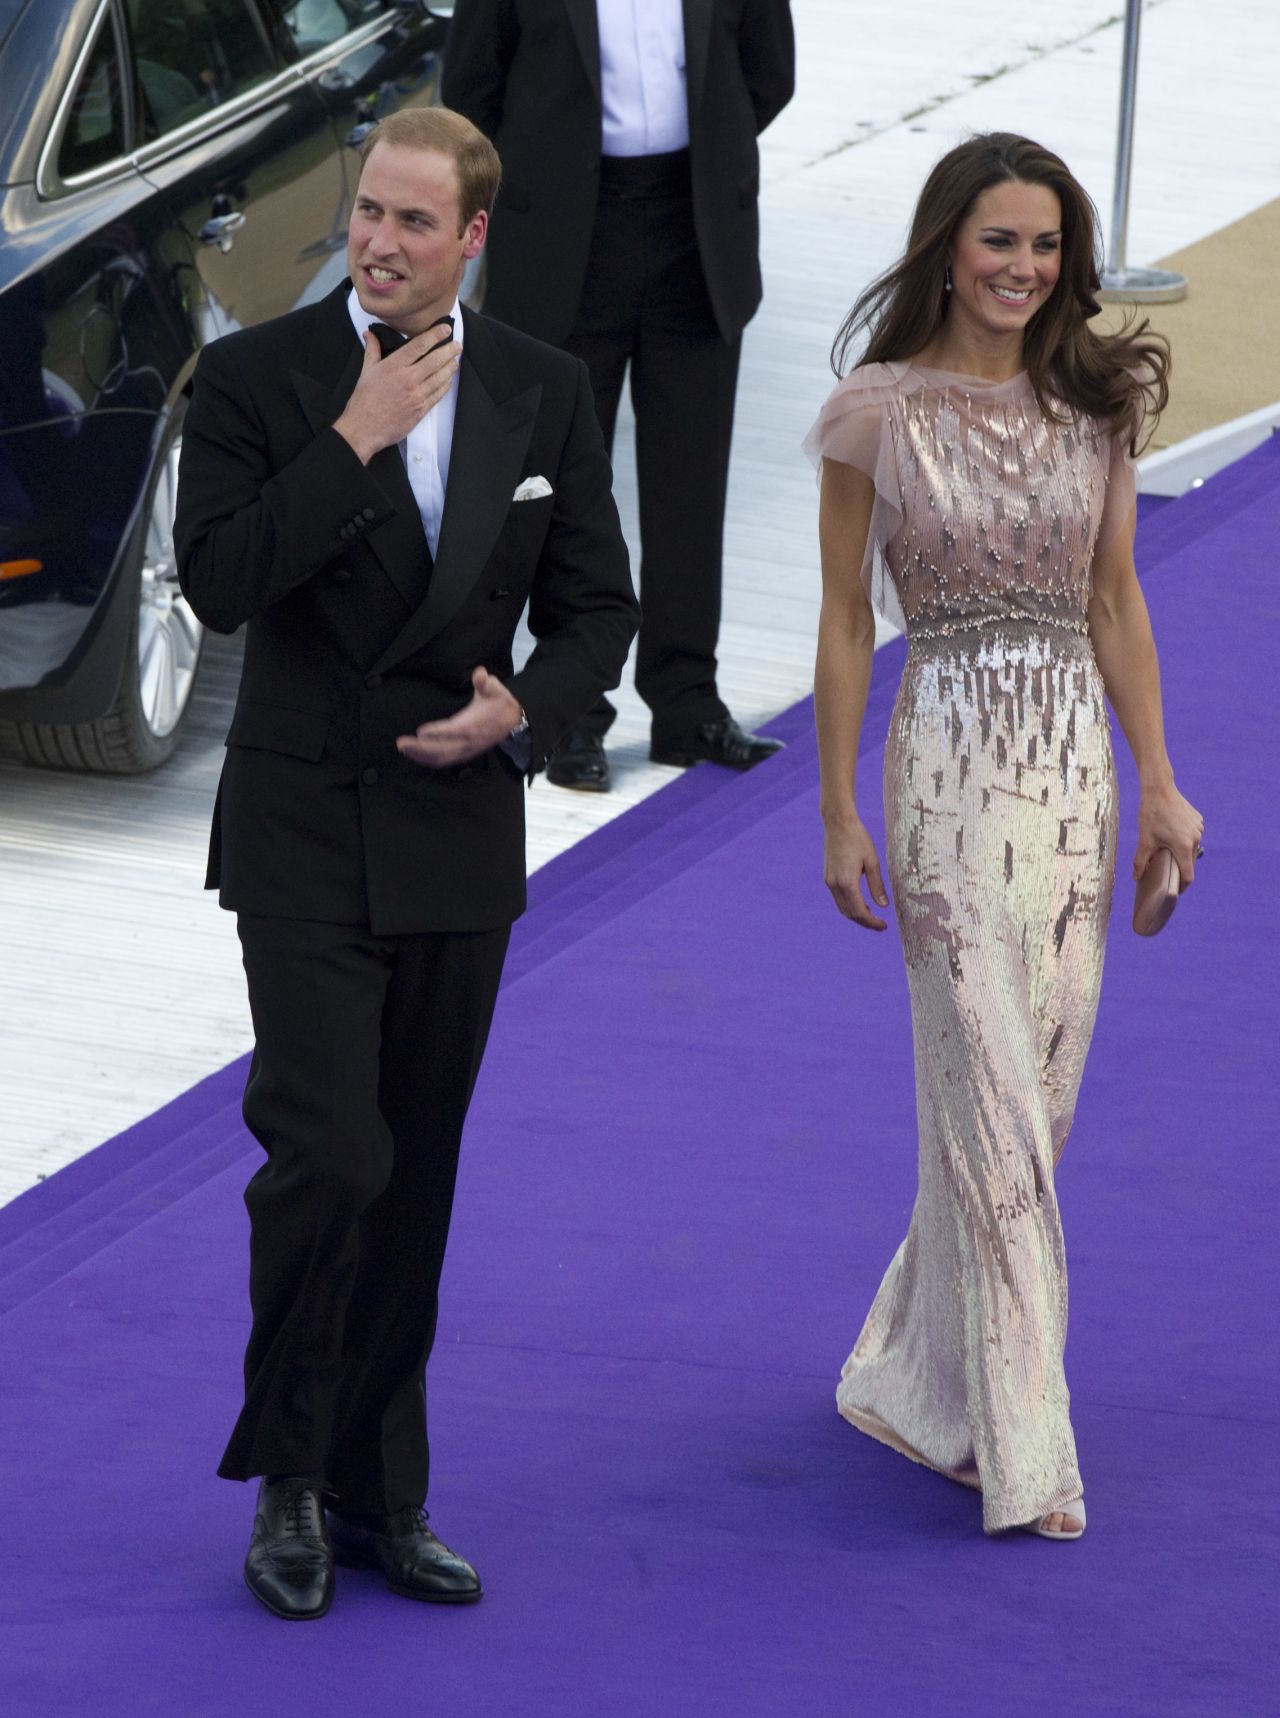 Stepping out in another Jenny Packham gown, Kate attends a gala at London's Kensington Palace with William on June 9 2011.